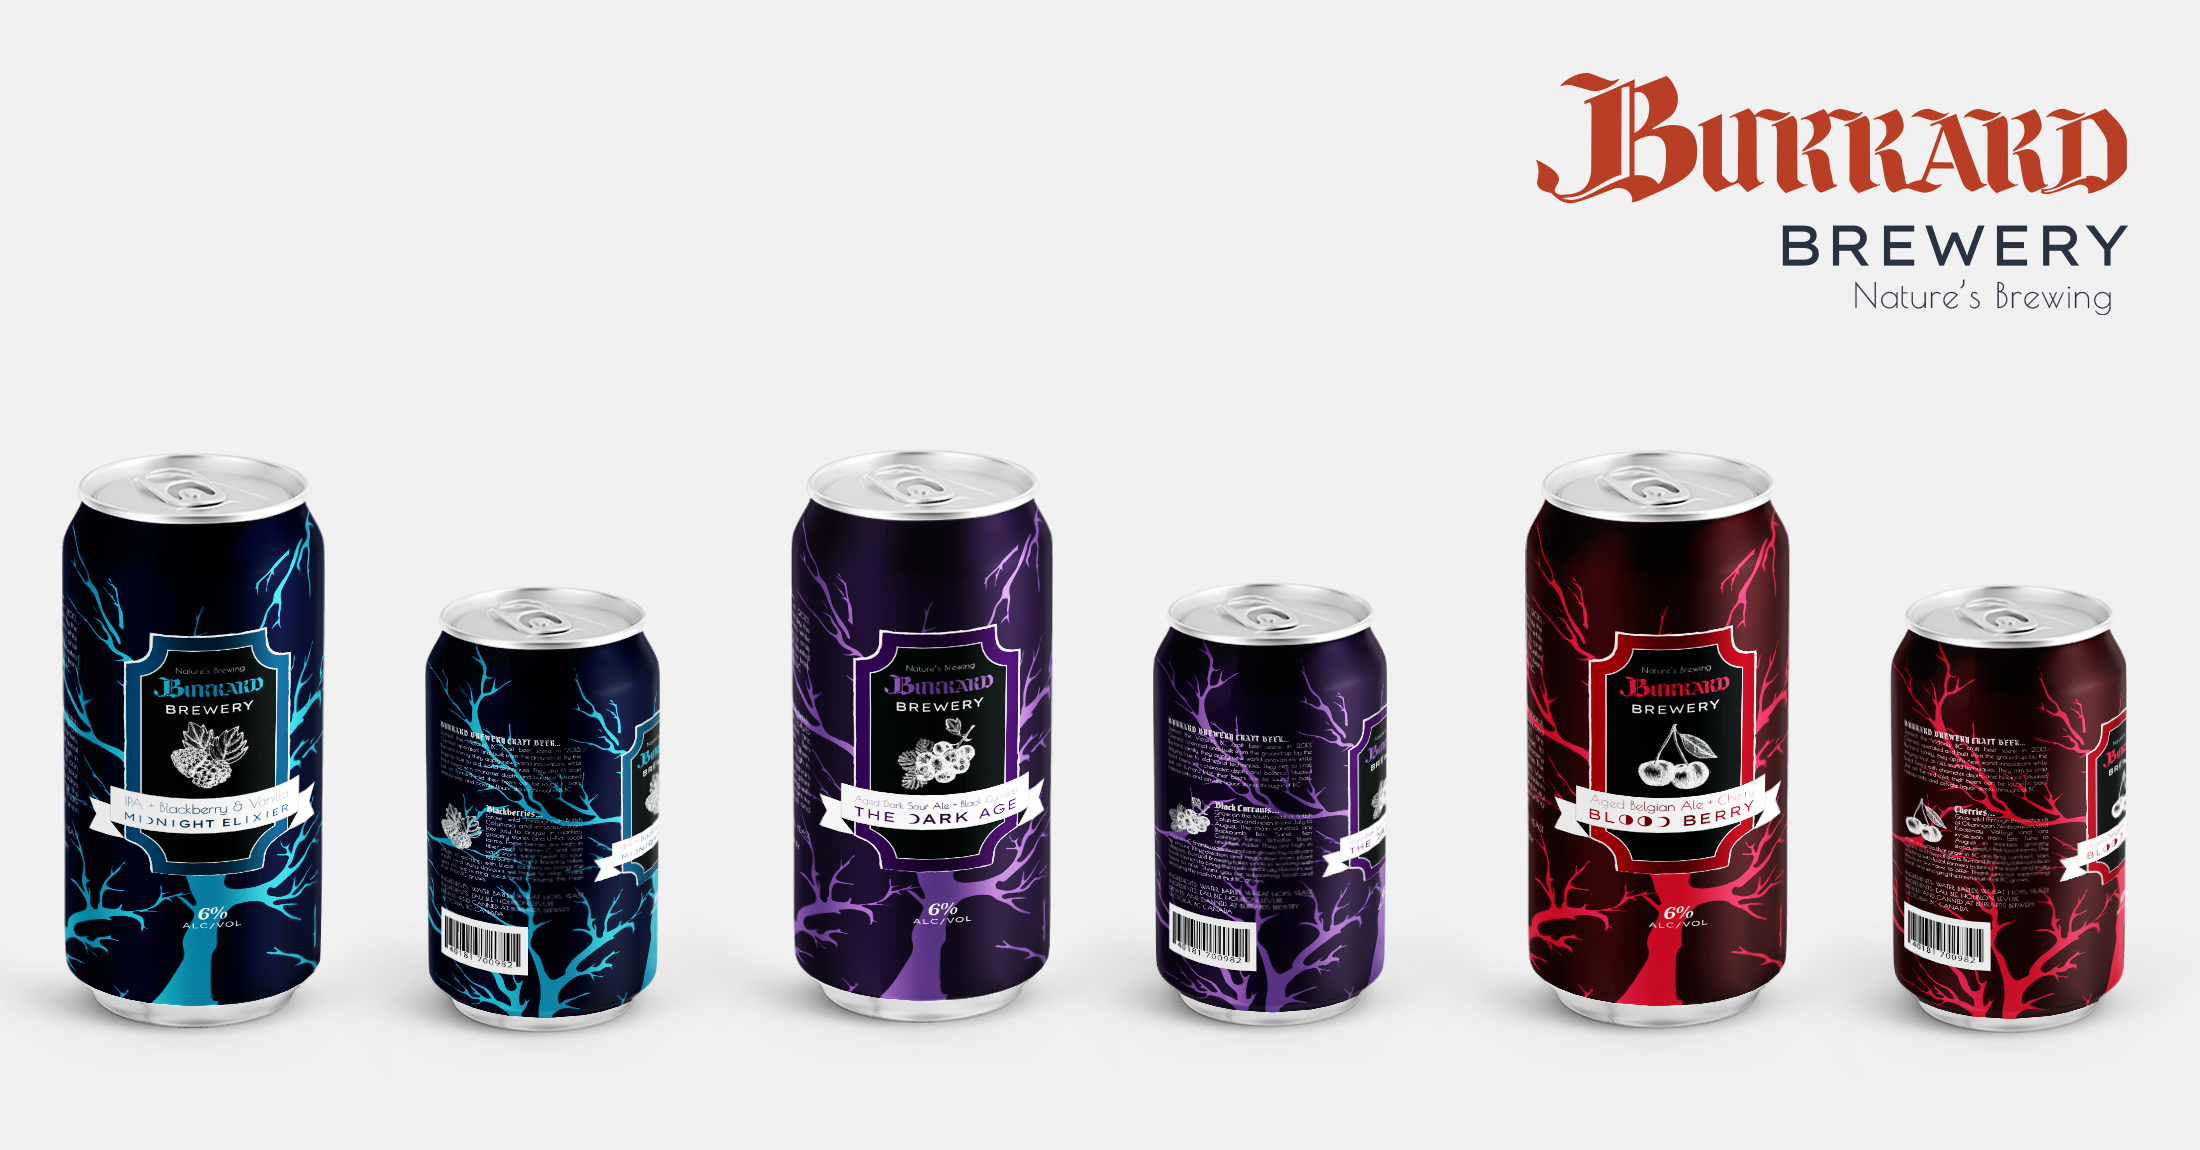 Burrard Brewery Product Design - Image 1